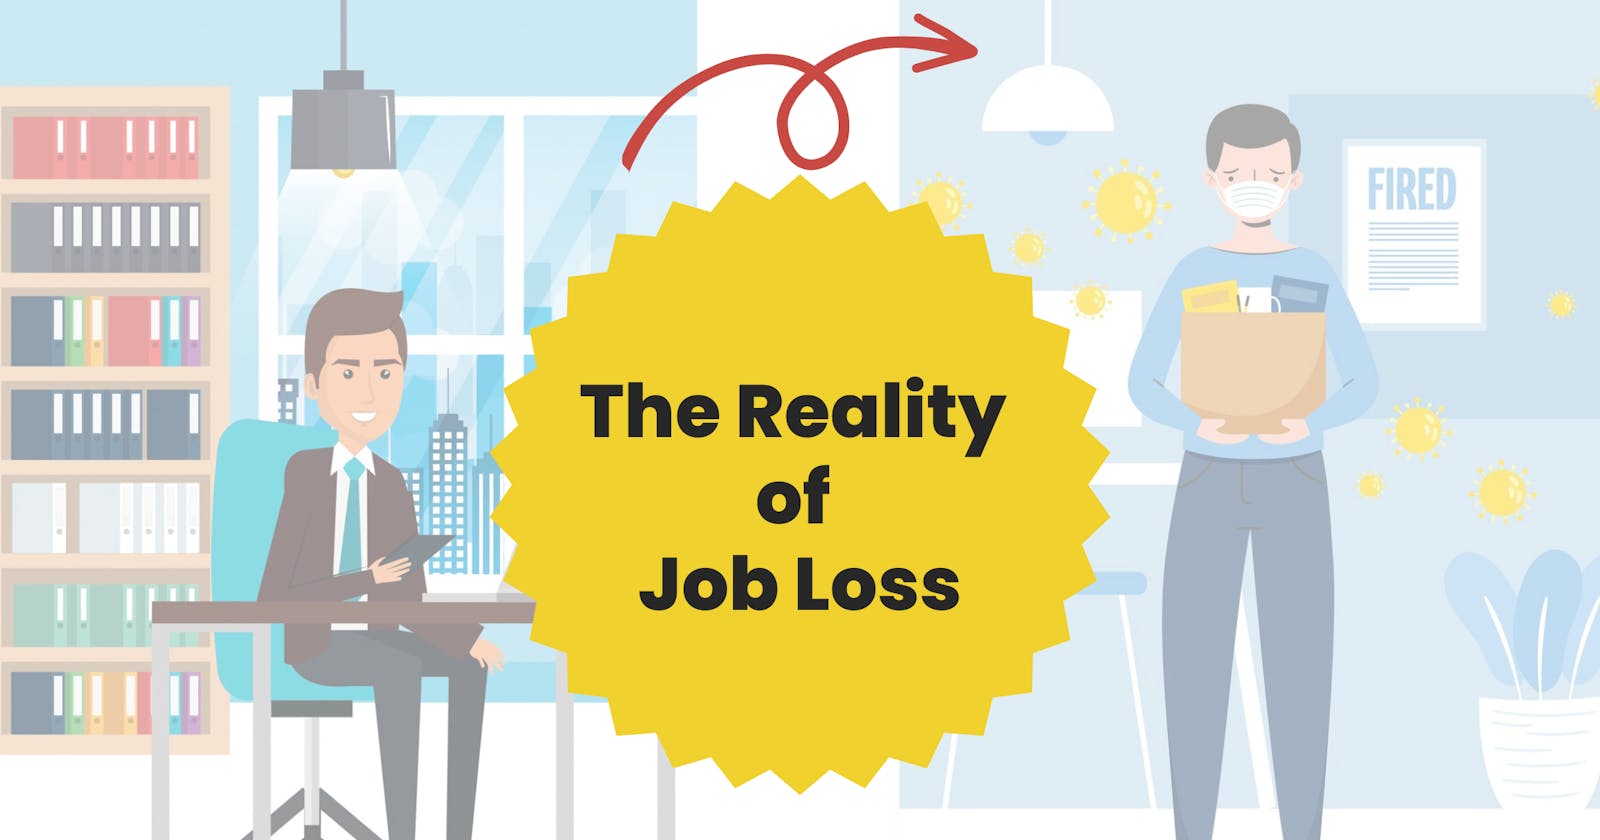 "The Impact of Layoffs: Understanding Job Loss in Today's World"